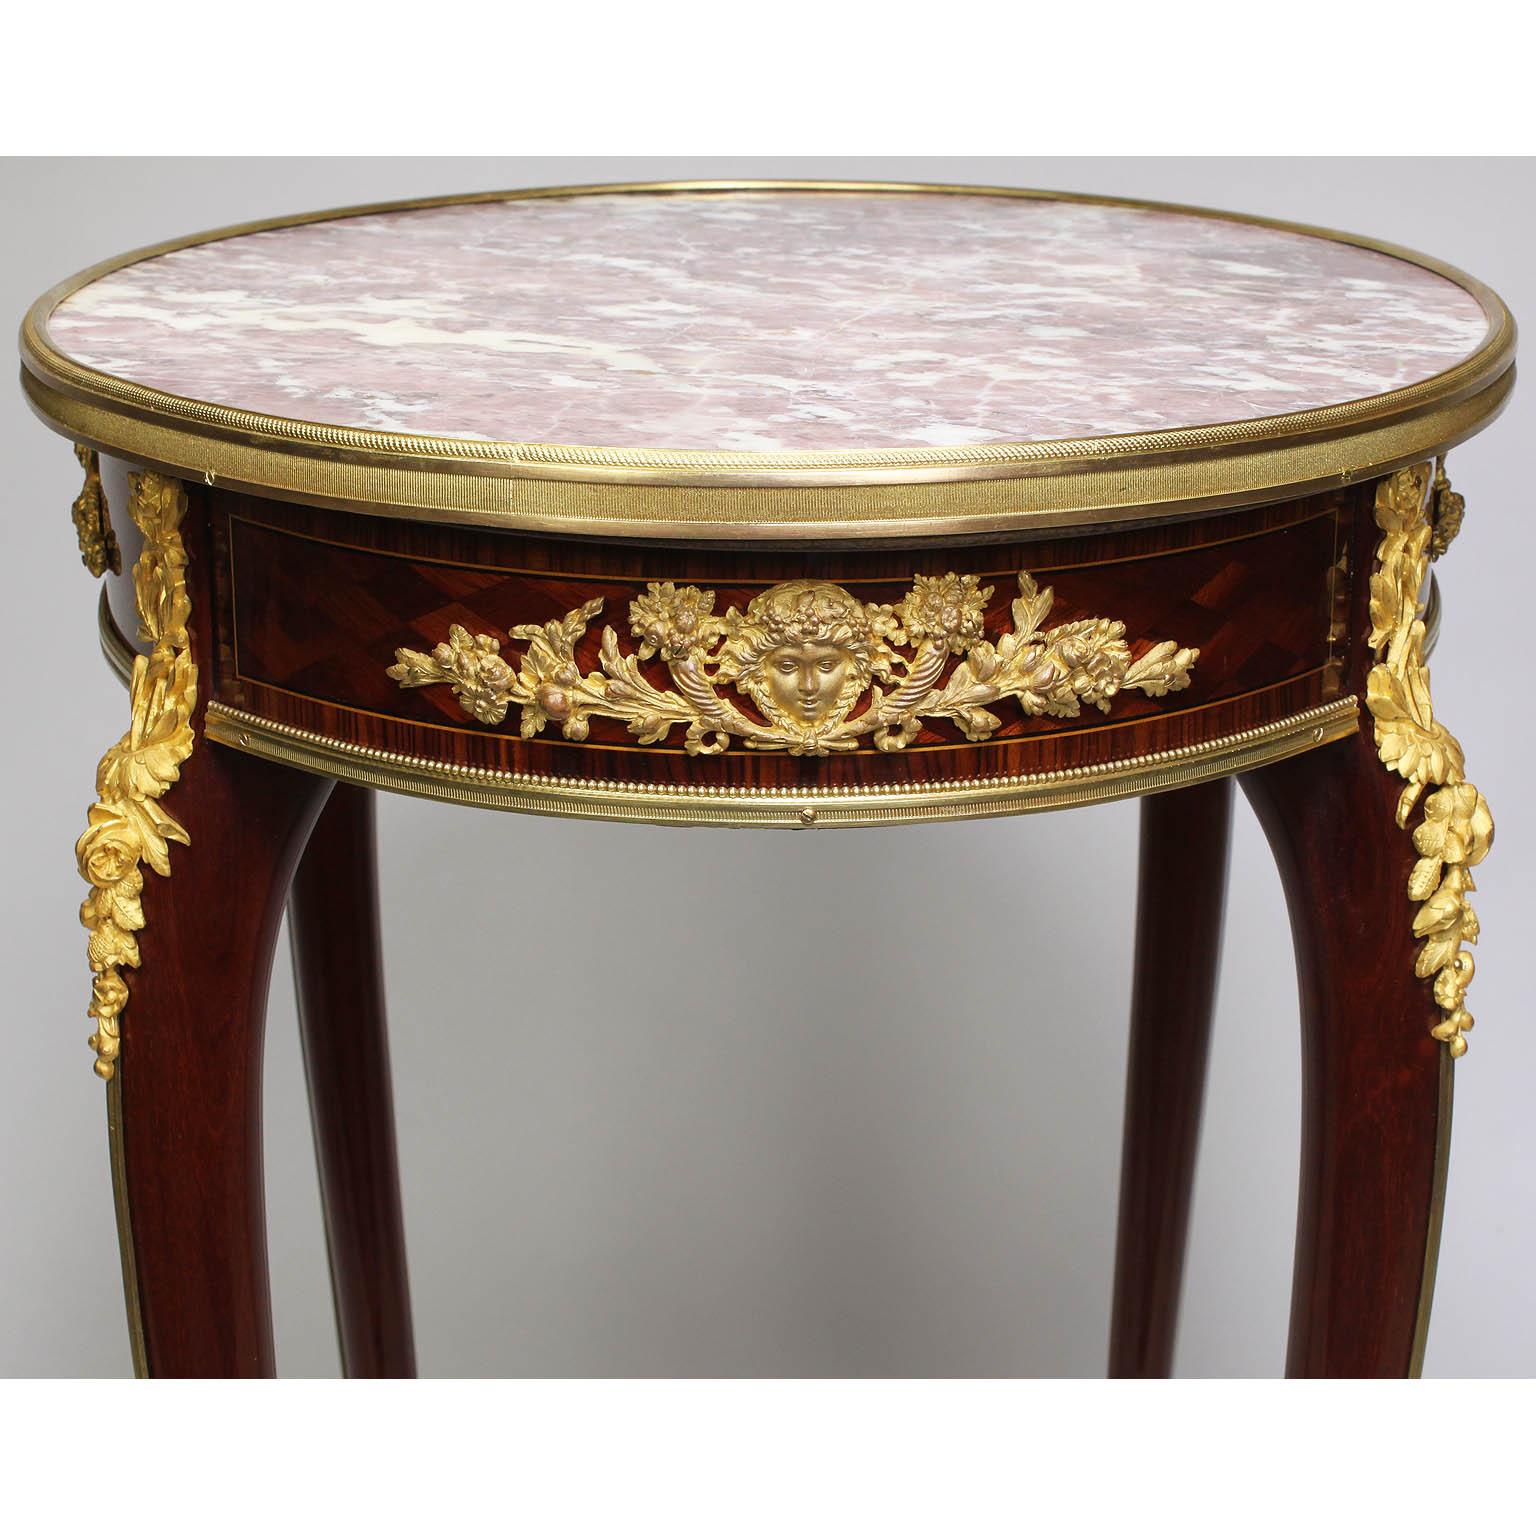 French 19th Century Parquetry & Ormolu Mounted Side Table Attr. François Linke For Sale 3